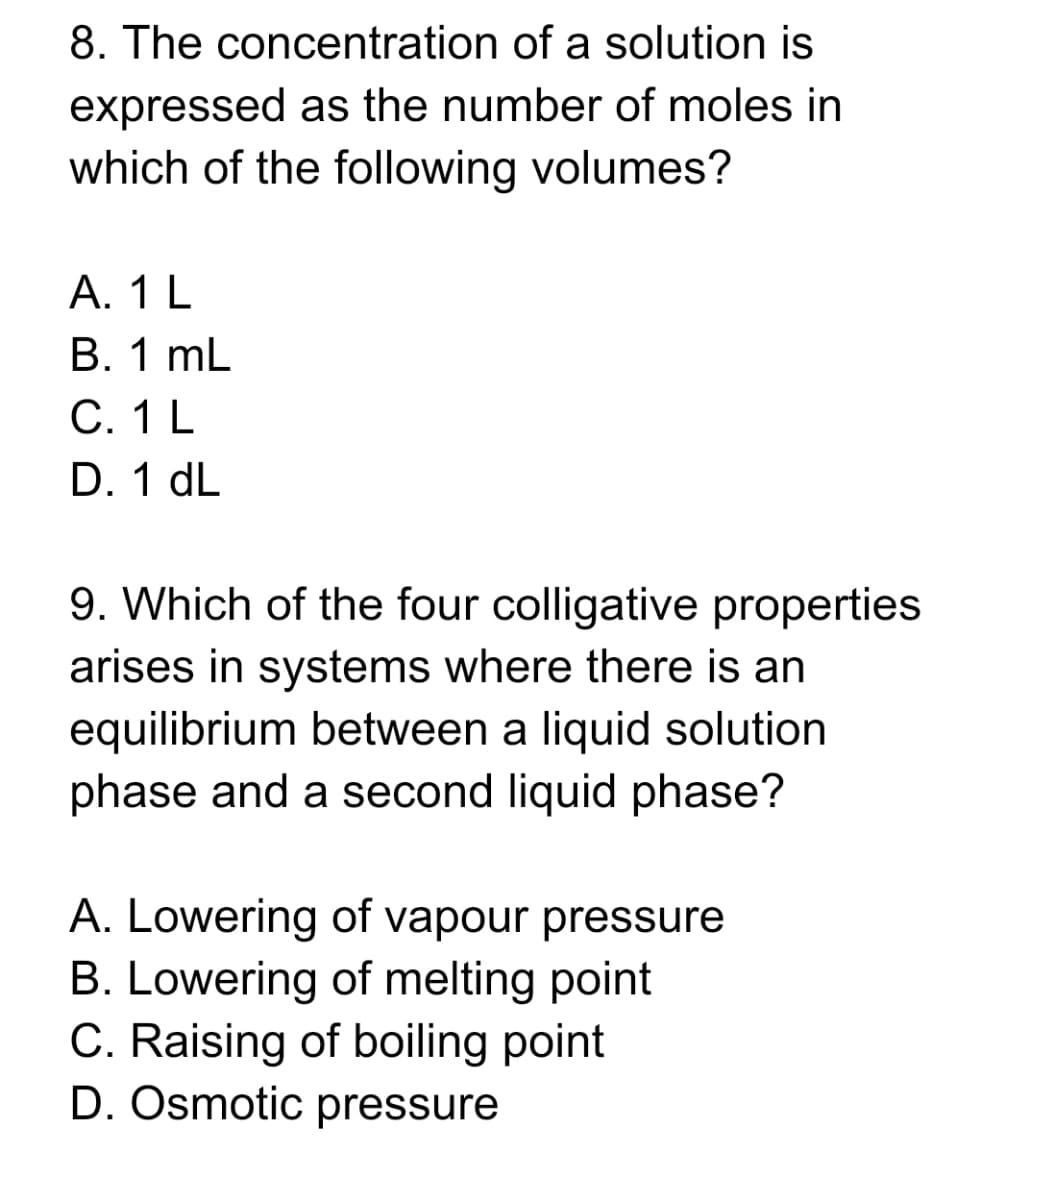 8. The concentration of a solution is
expressed as the number of moles in
which of the following volumes?
А. 1 L
В. 1 mL
C. 1 L
D. 1 dL
9. Which of the four colligative properties
arises in systems where there is an
equilibrium between a liquid solution
phase and a second liquid phase?
A. Lowering of vapour pressure
B. Lowering of melting point
C. Raising of boiling point
D. Osmotic pressure
